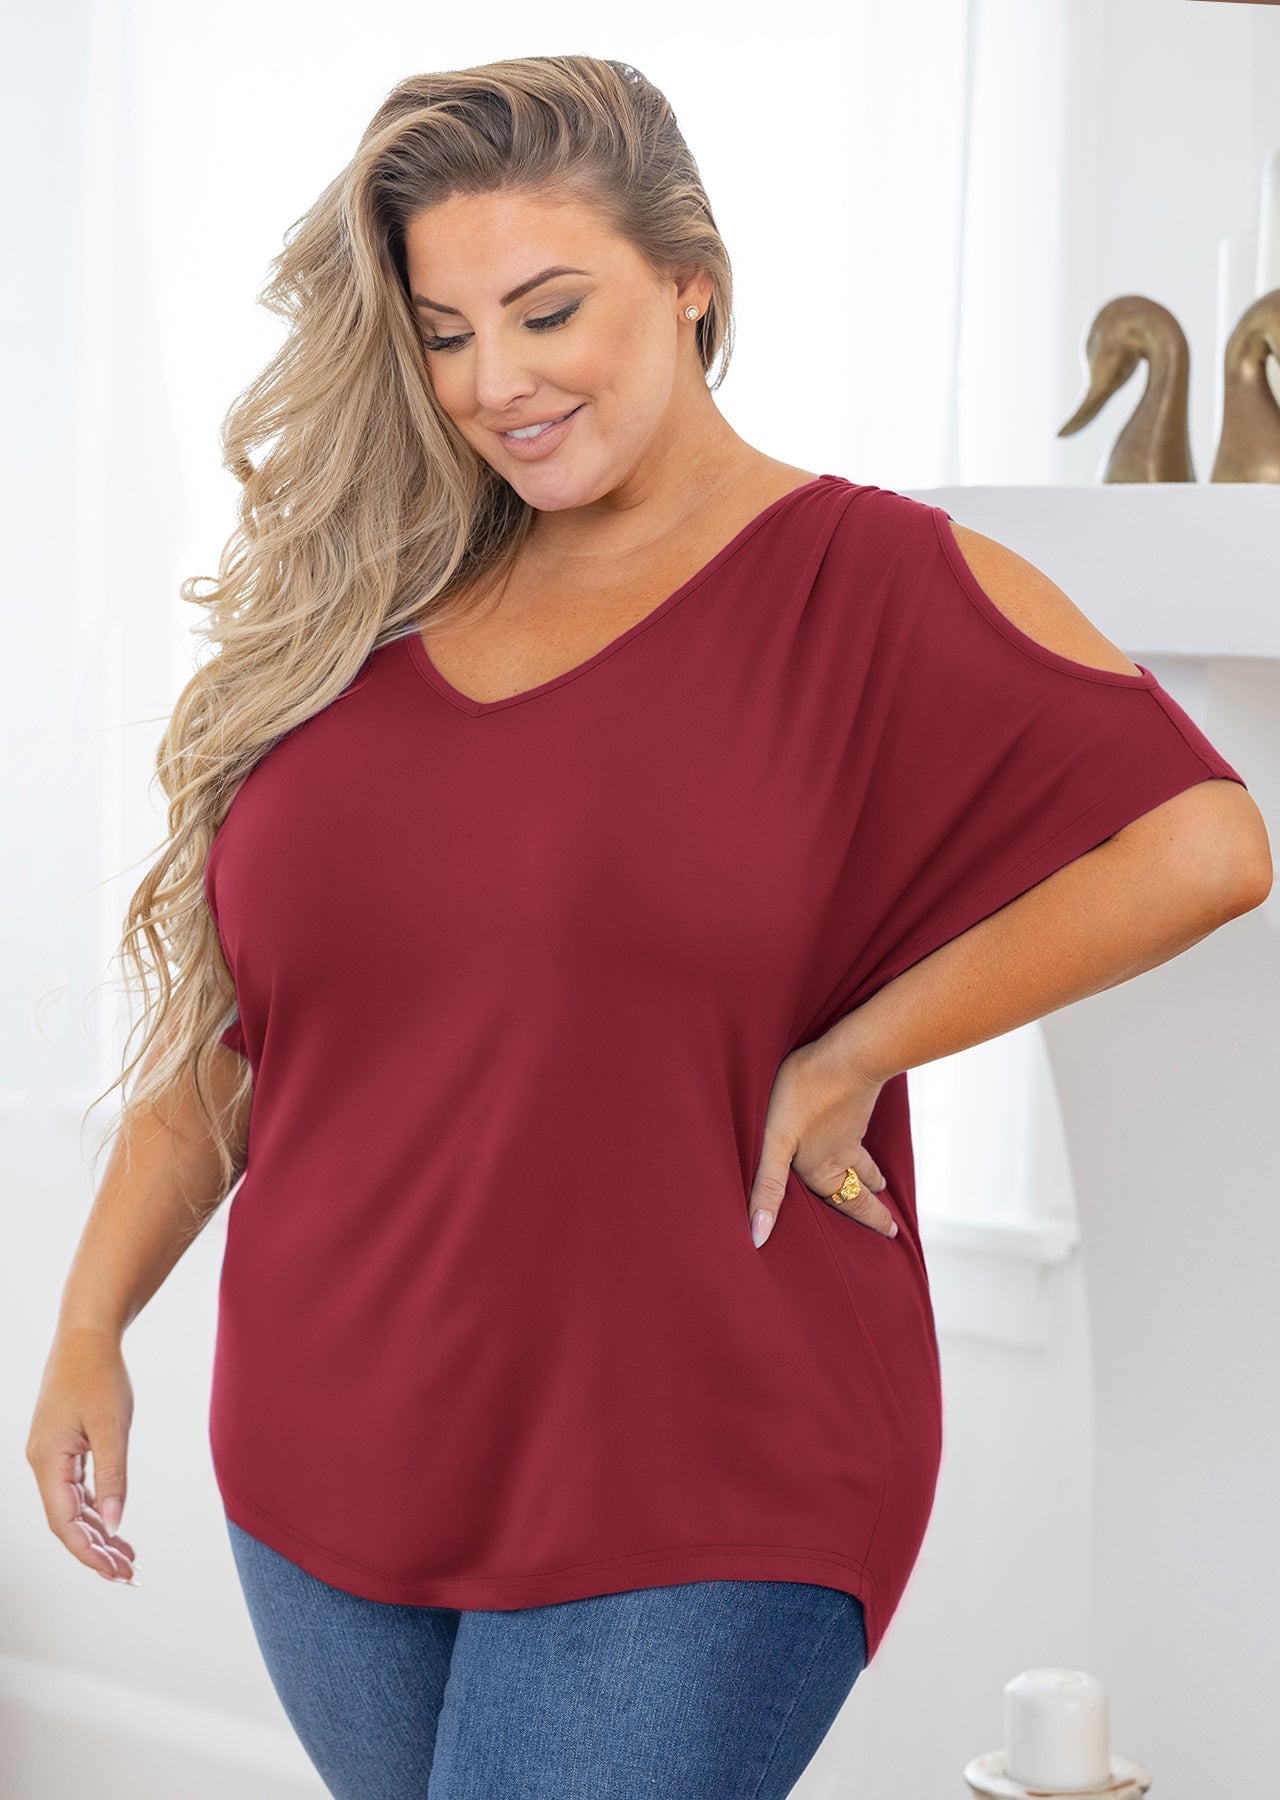 SHOWMALL Plus Size Women Top Short Sleeve Gray 3X Tunic Shirt Summer  Maternity Clothing Loose Fitting Blouse Clothes 